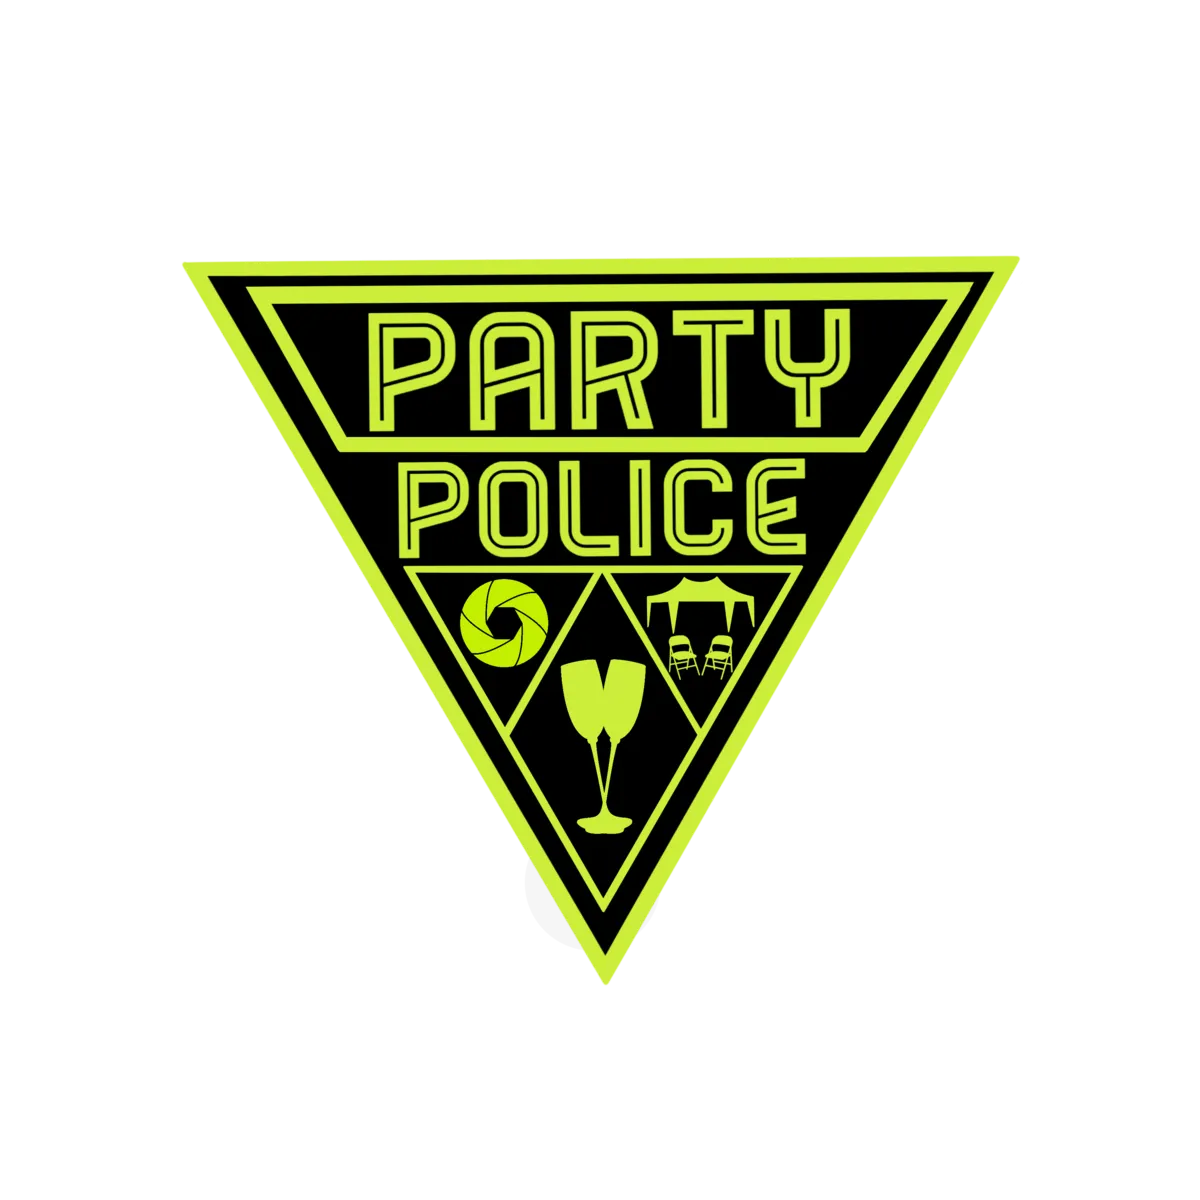 Party Police after url redirect